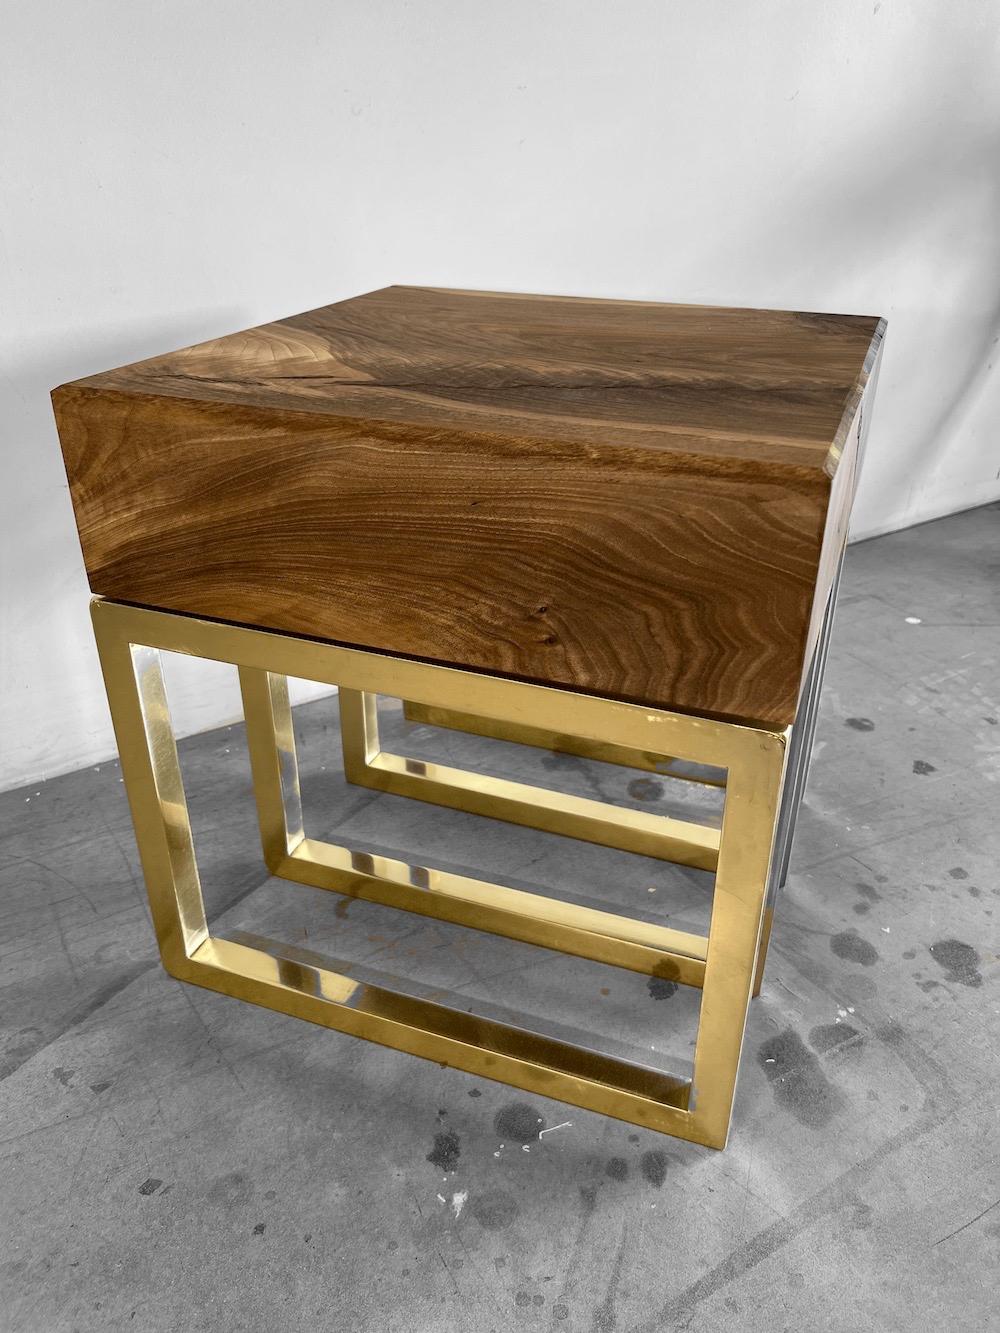 Metalwork Casper by Seve Quantum Design 'France', Walnut Wood and Brass Stool For Sale